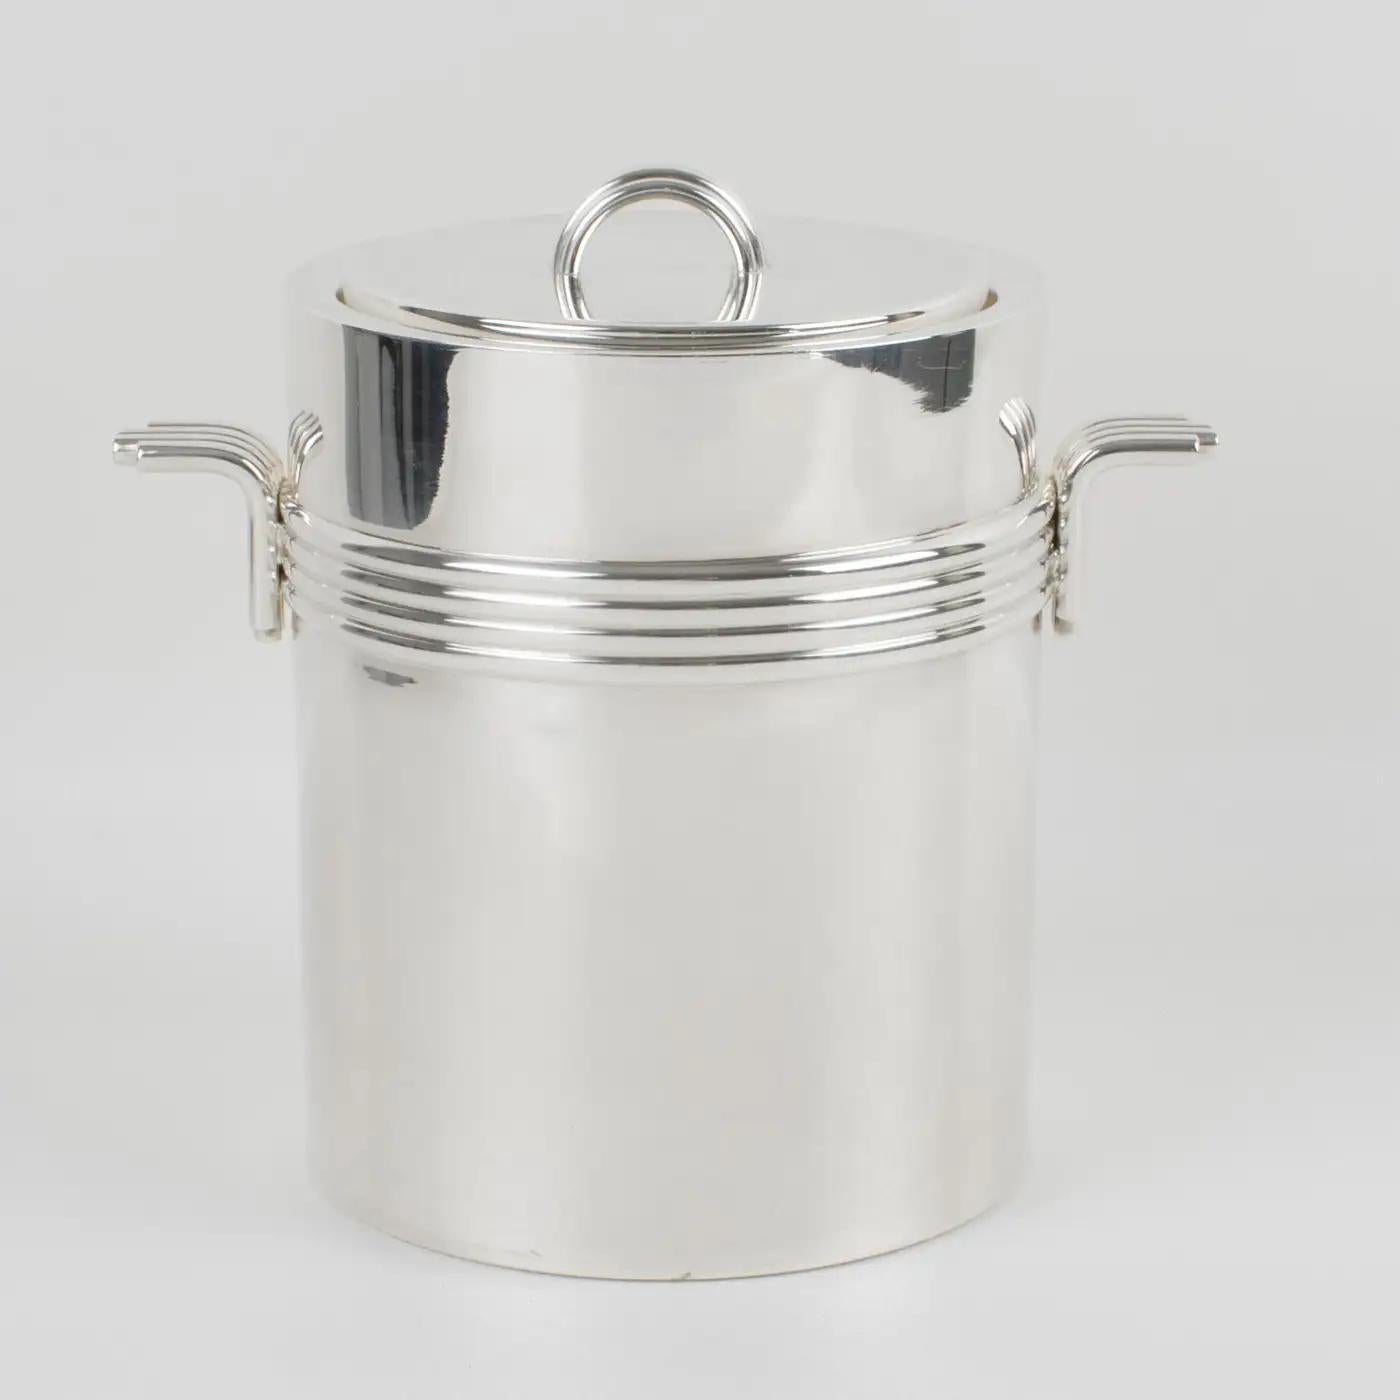 Christian Dior, Paris, designed this modernist lidded ice bucket or wine cooler. This sophisticated silver-plate ice bucket features an iconic streamlined design with concentric rings and clean lines. The piece is marked underside 